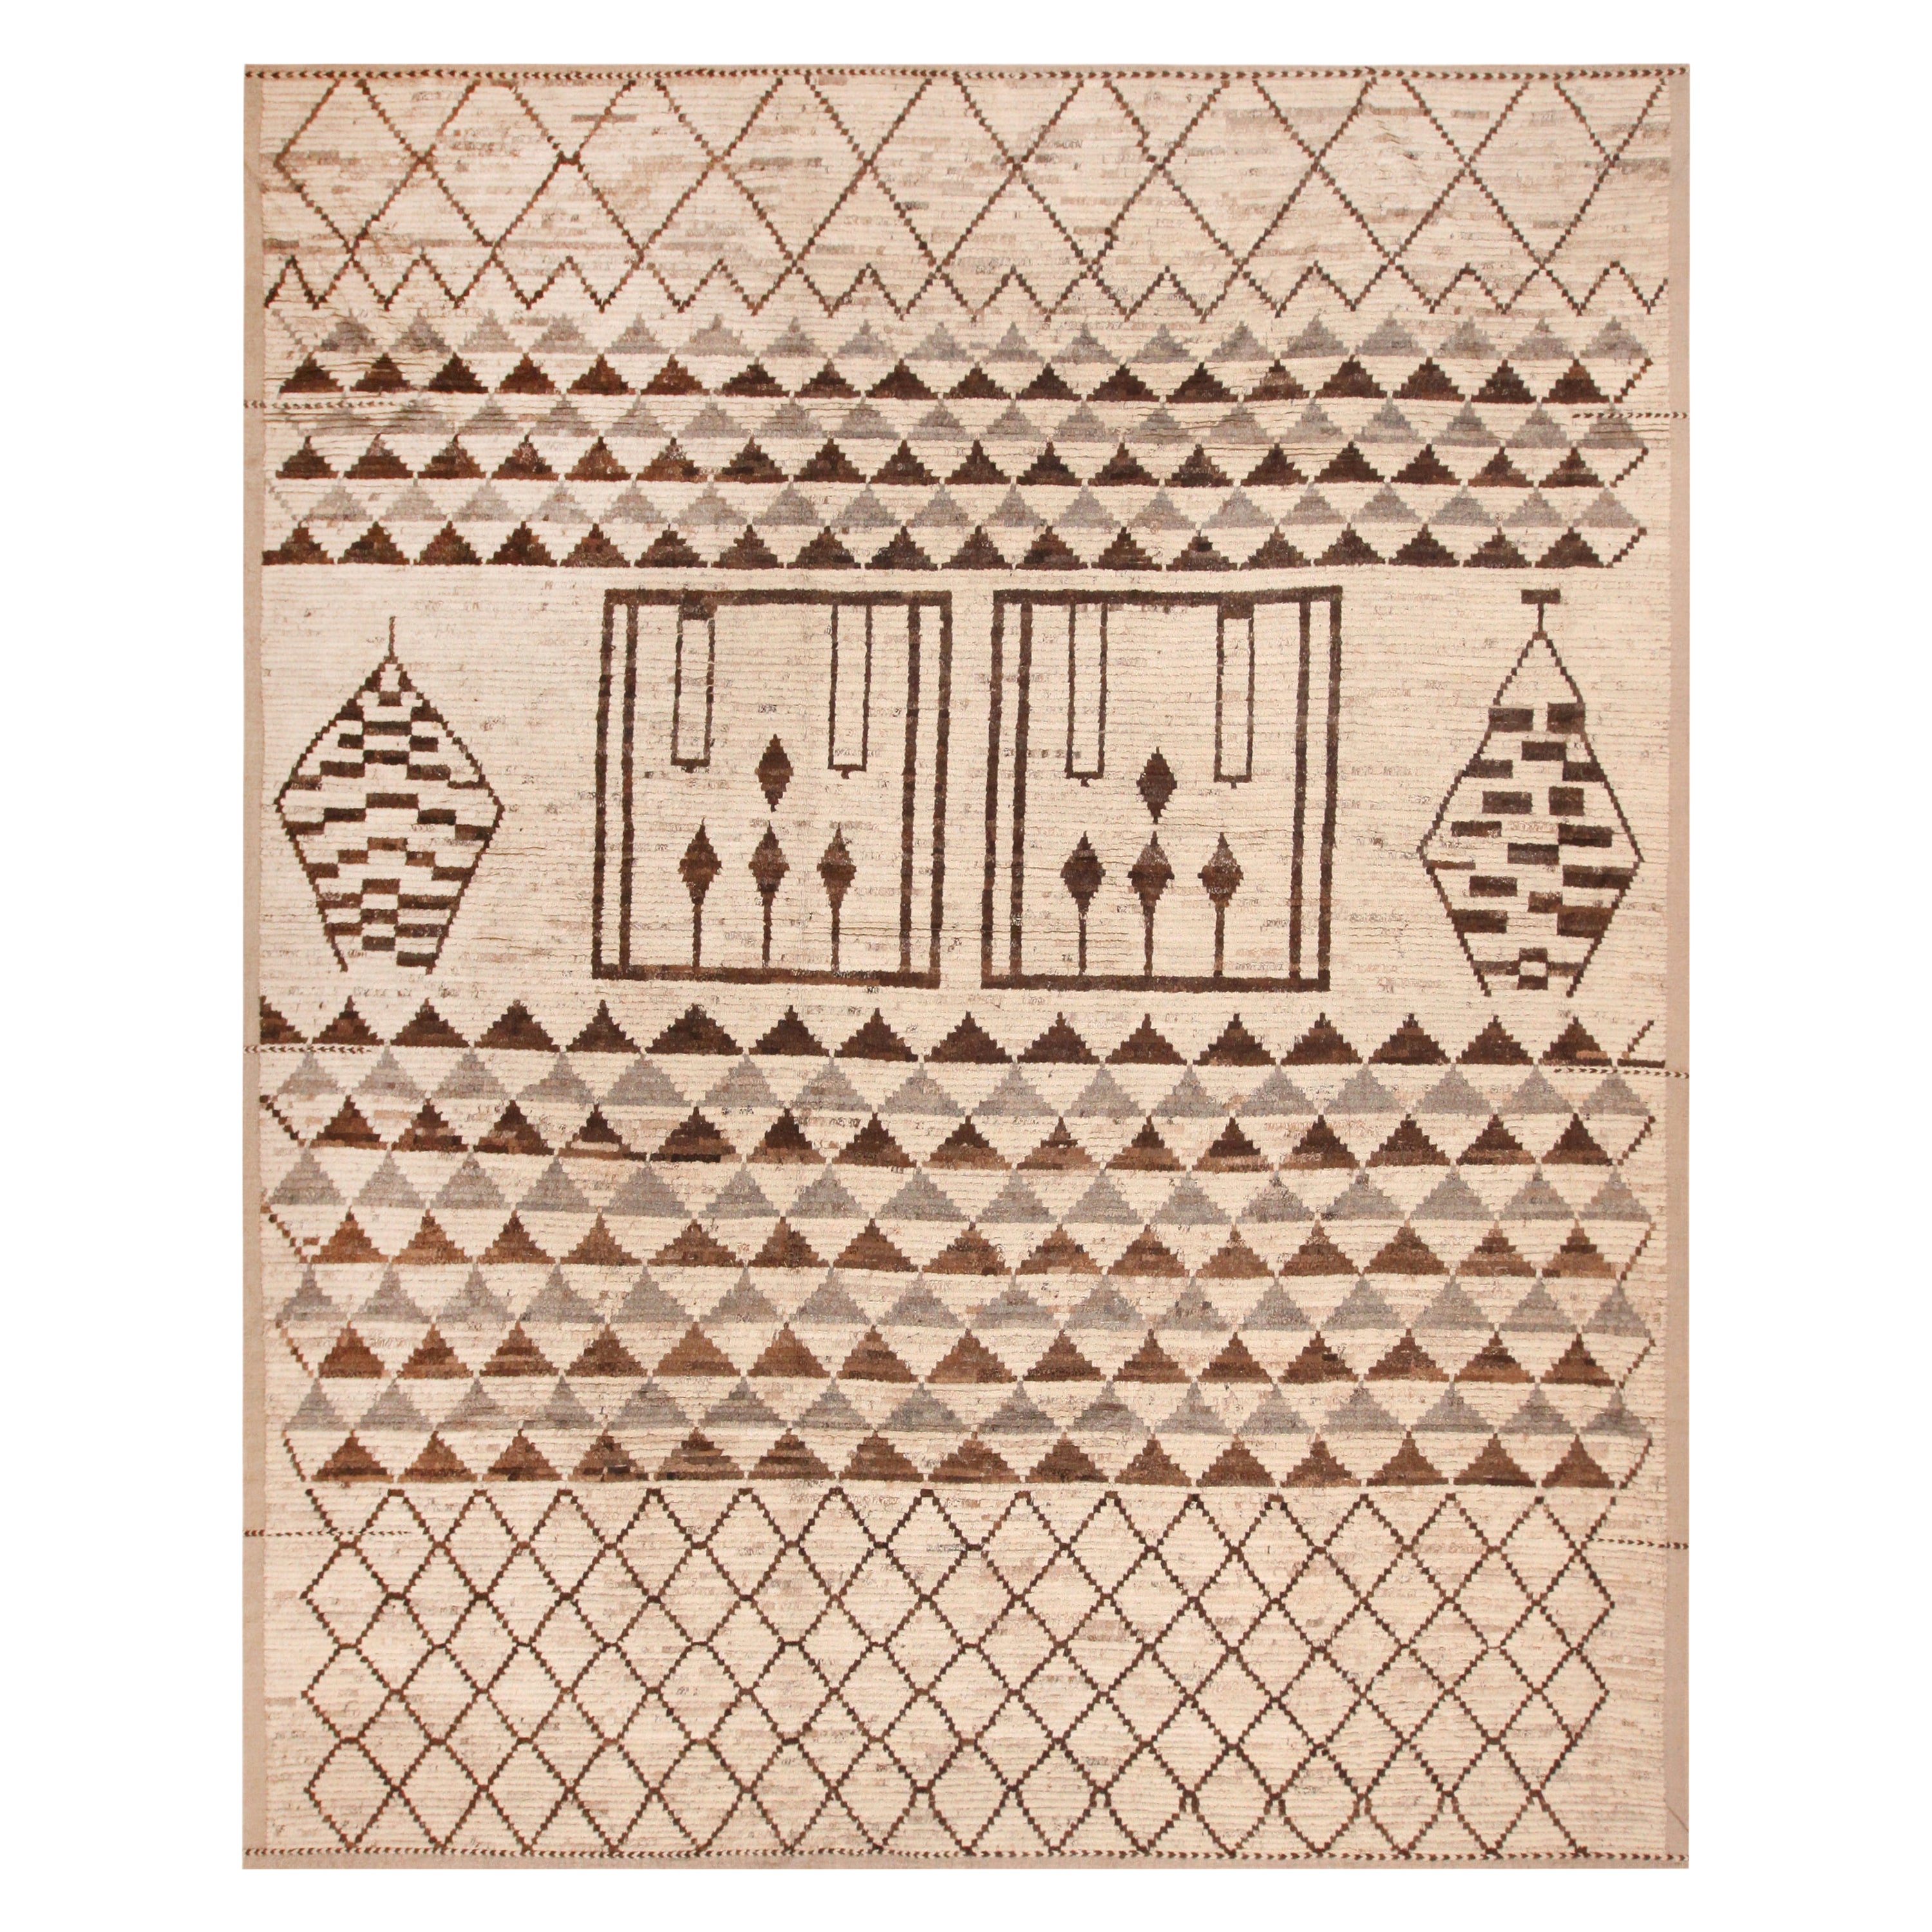 Nazmiyal Collection Tribal Berber Design Modern Rug. 12 ft 4 in x 15 ft 3 in For Sale